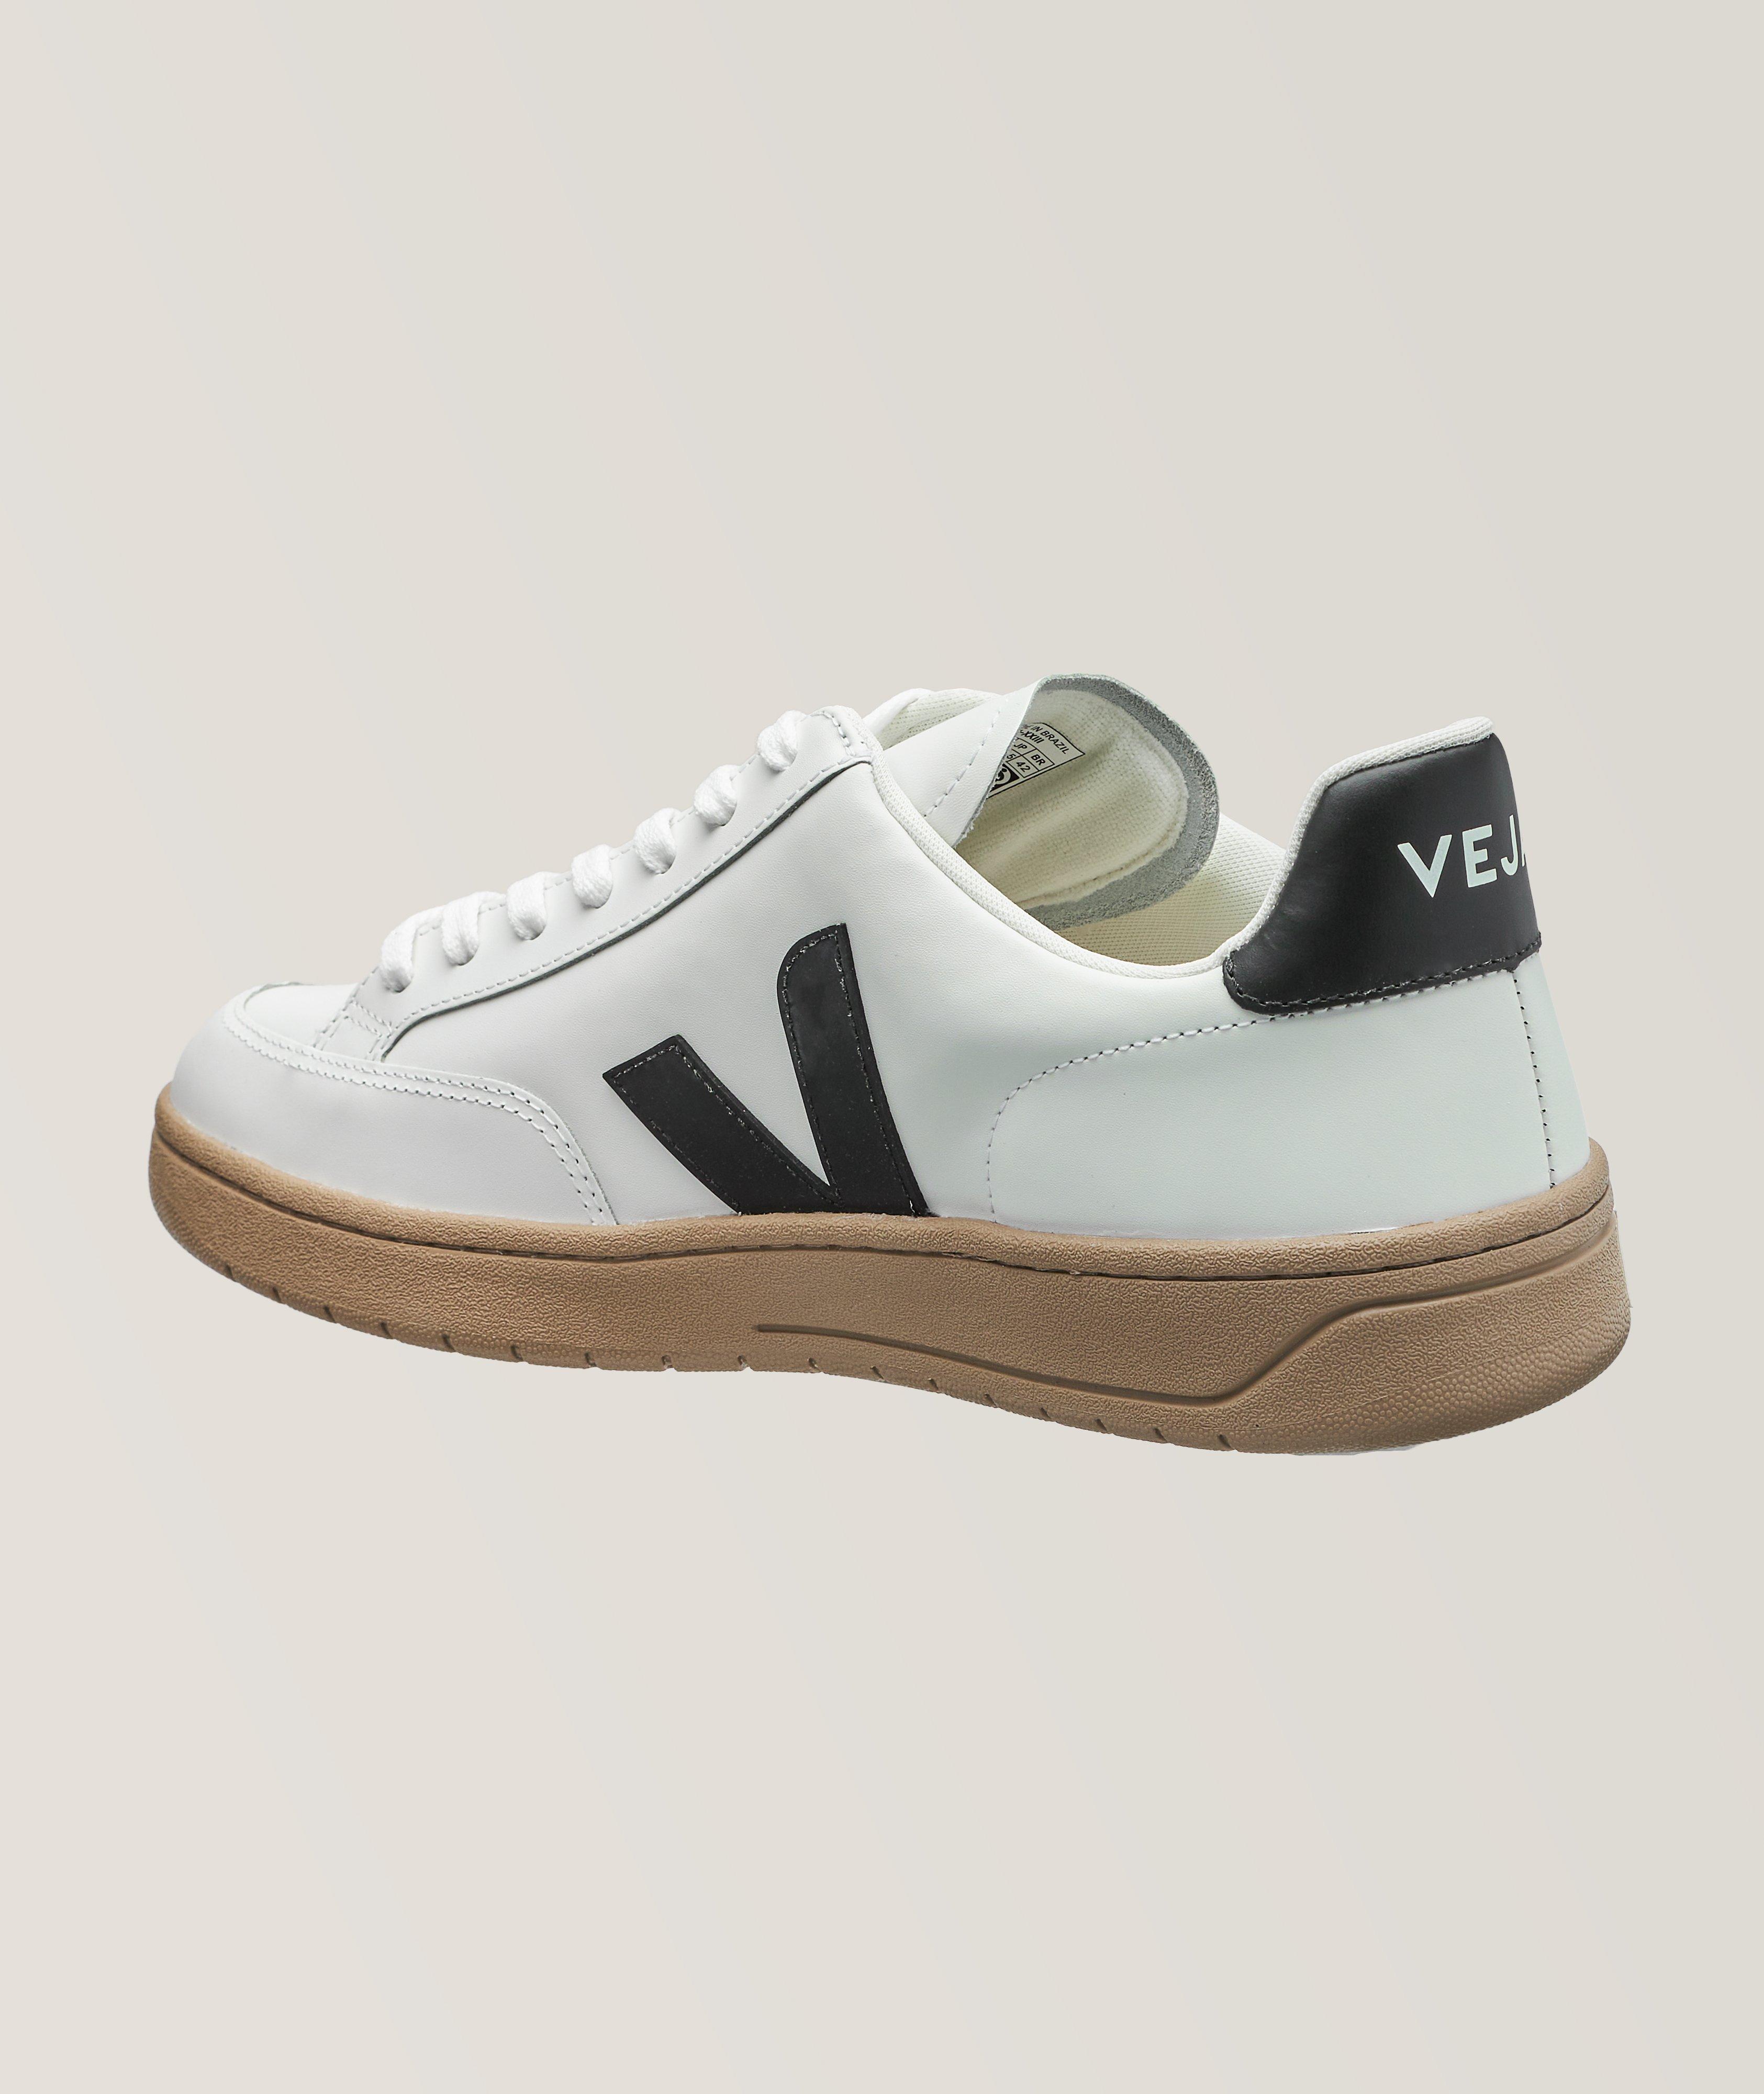 V-12 Leather Sneakers image 1